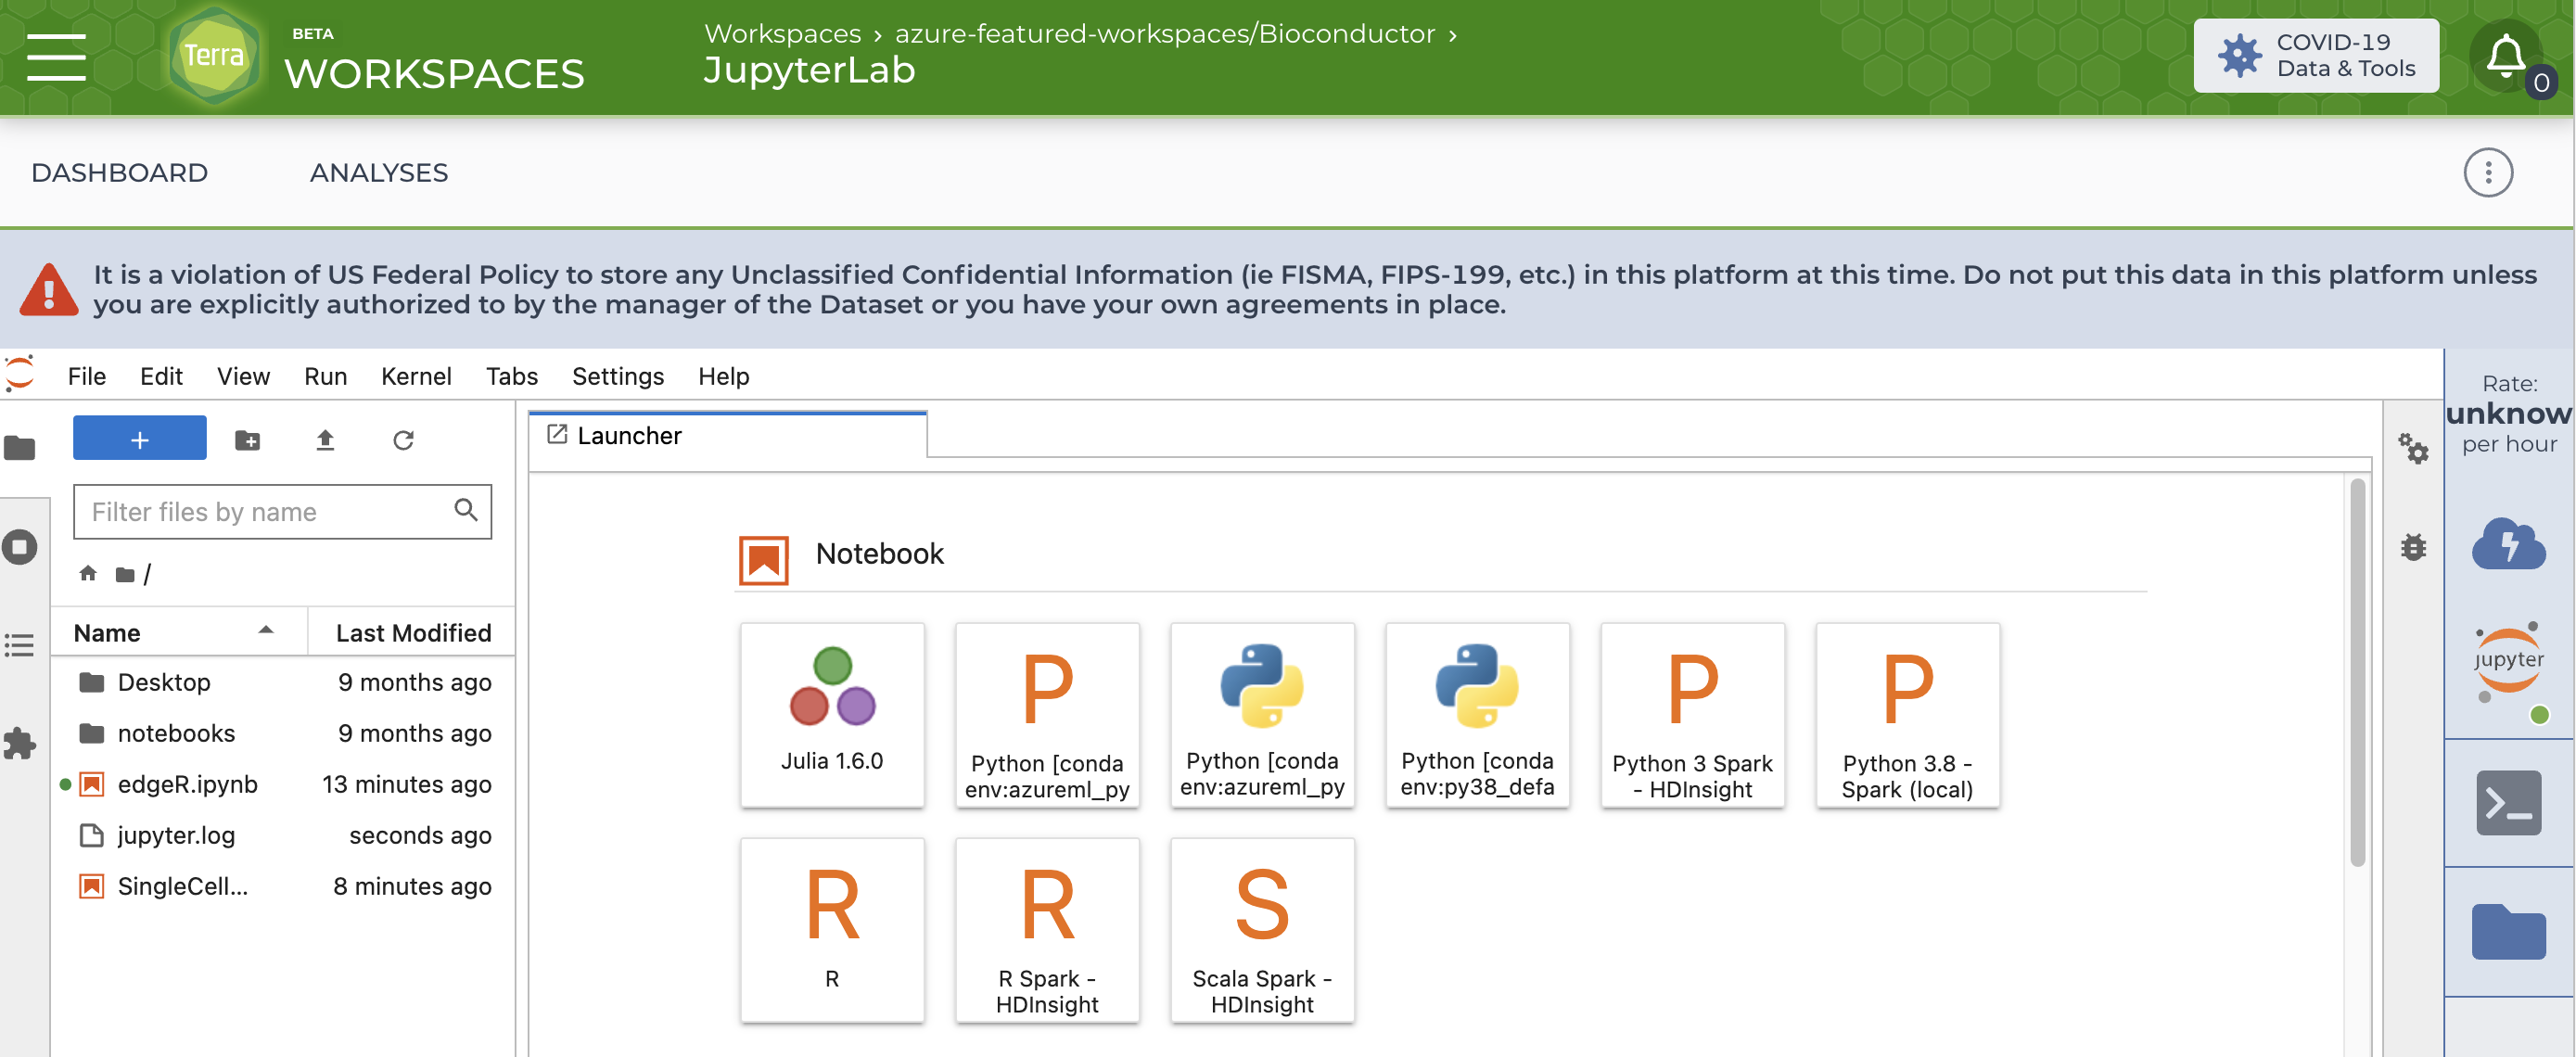 Screenshot of JupyterLab app in Terra, with the directory tree on the left and cards for nine notebooks in the center section